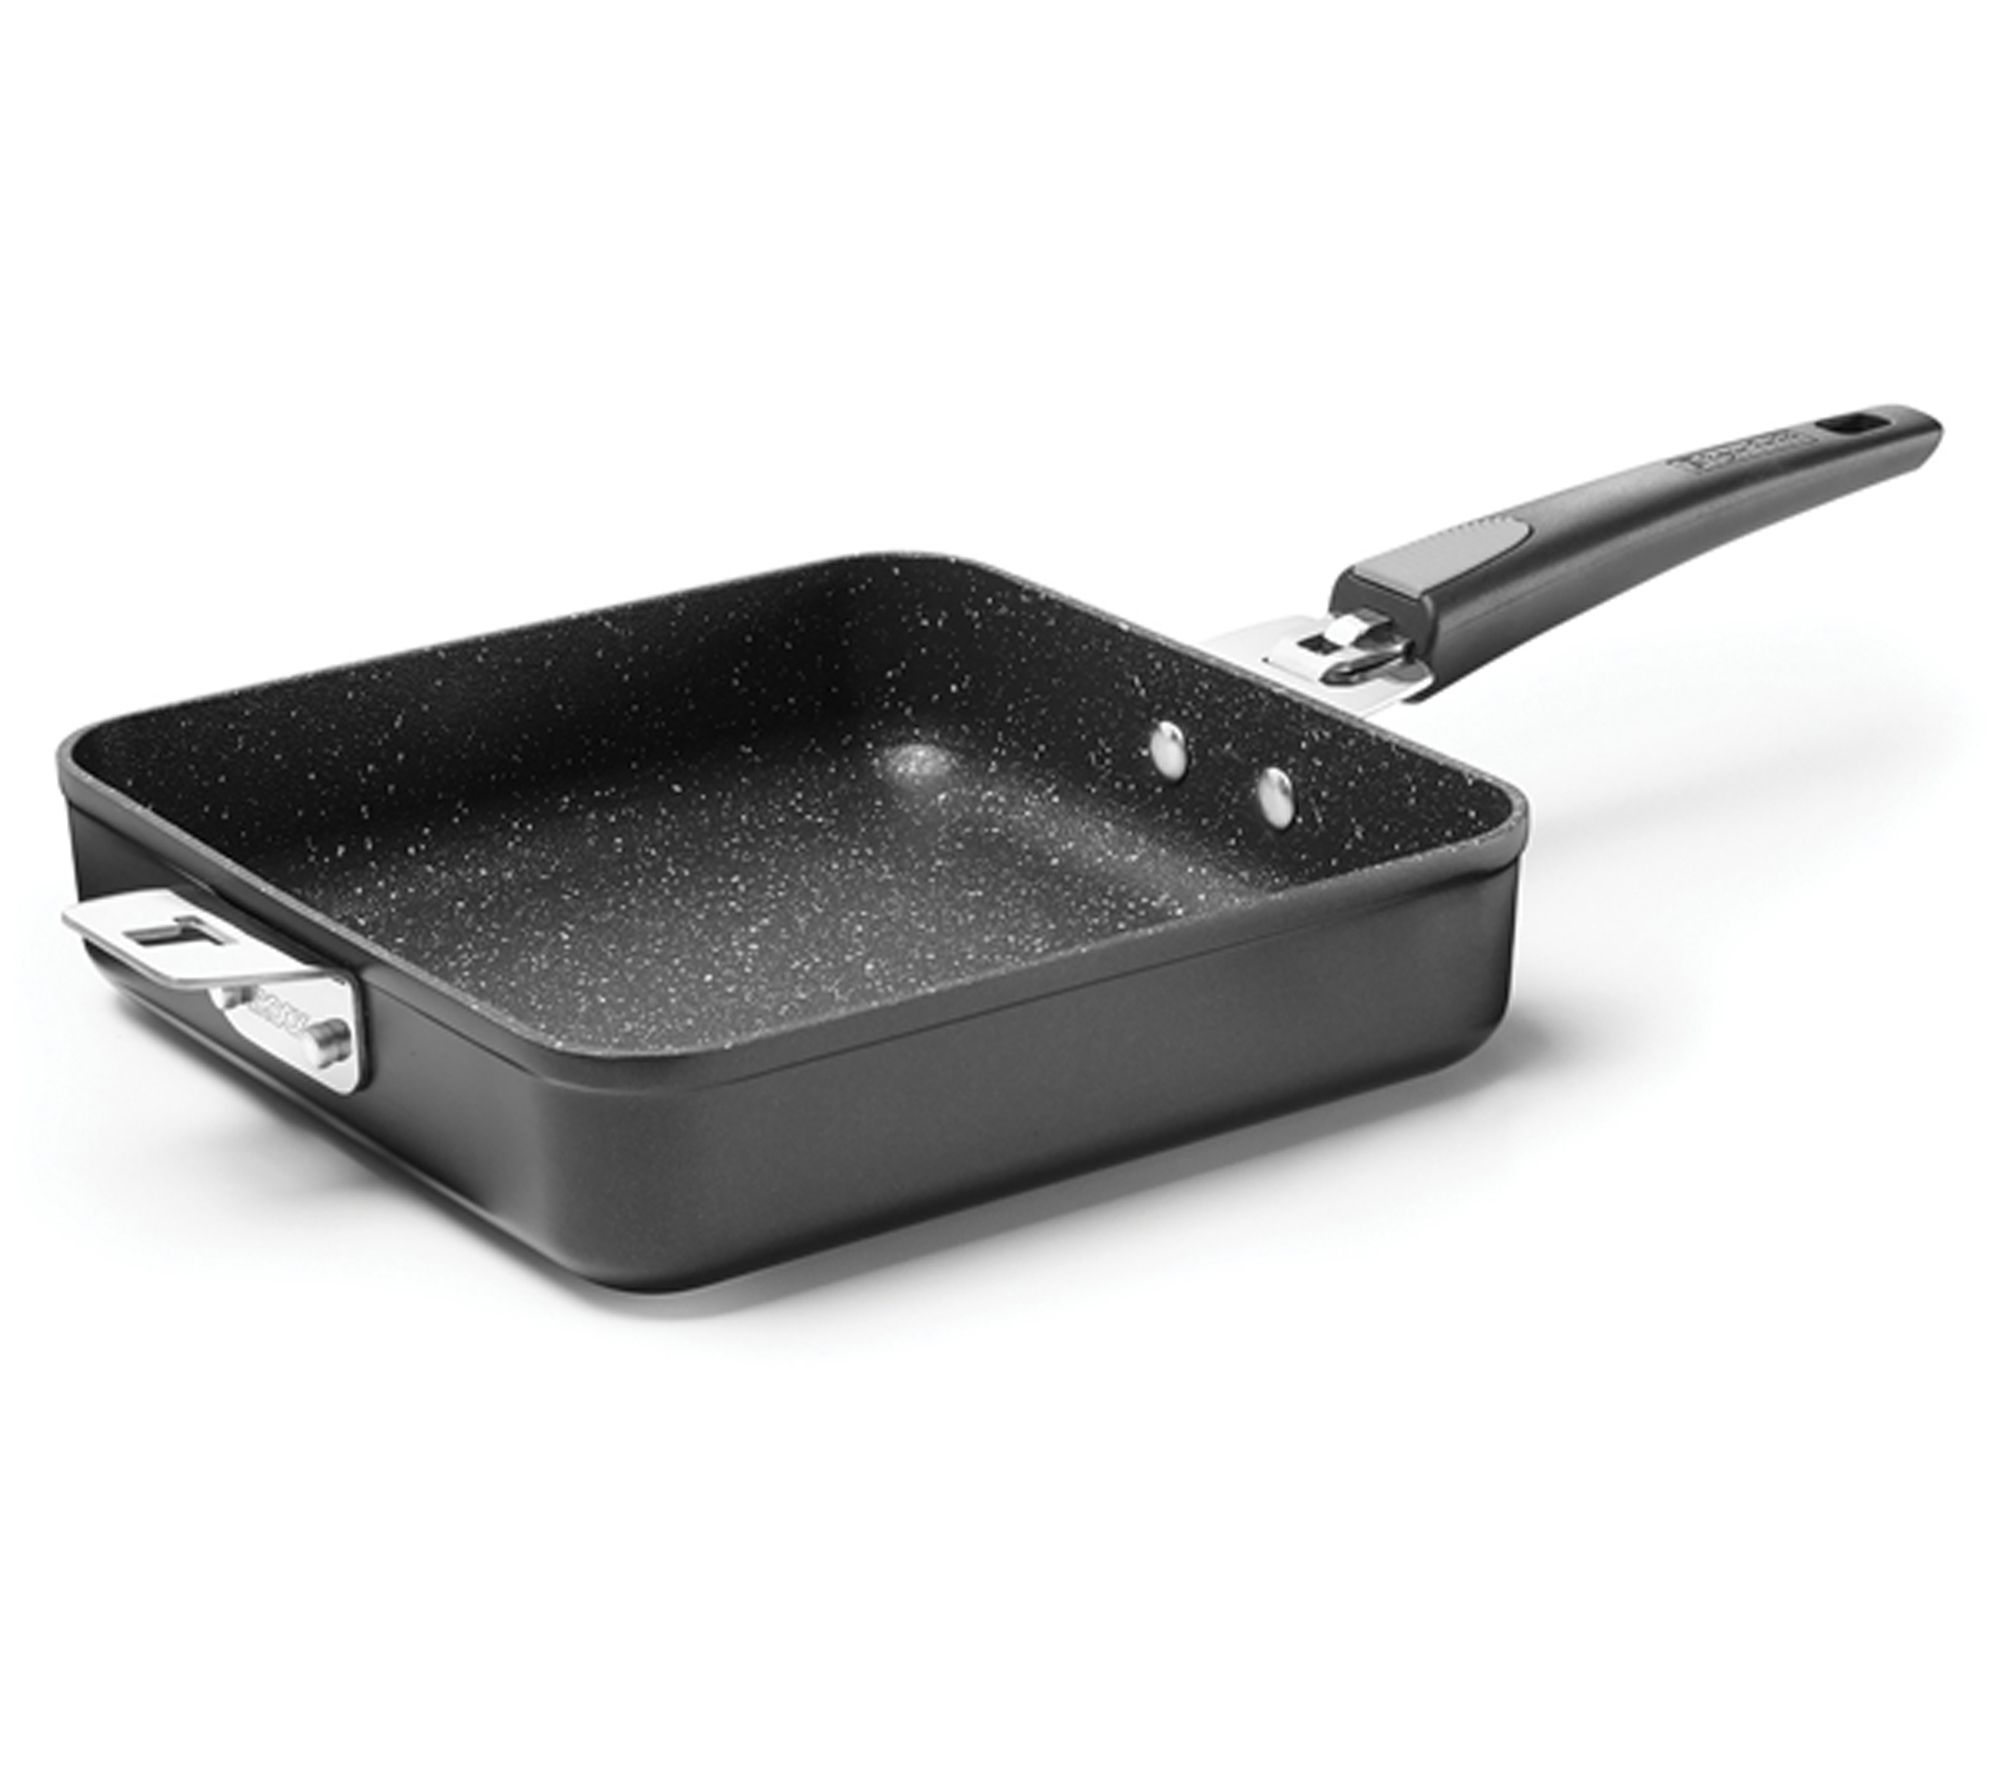 The Rock by Starfrit Nonstick Cookware Review - Consumer Reports